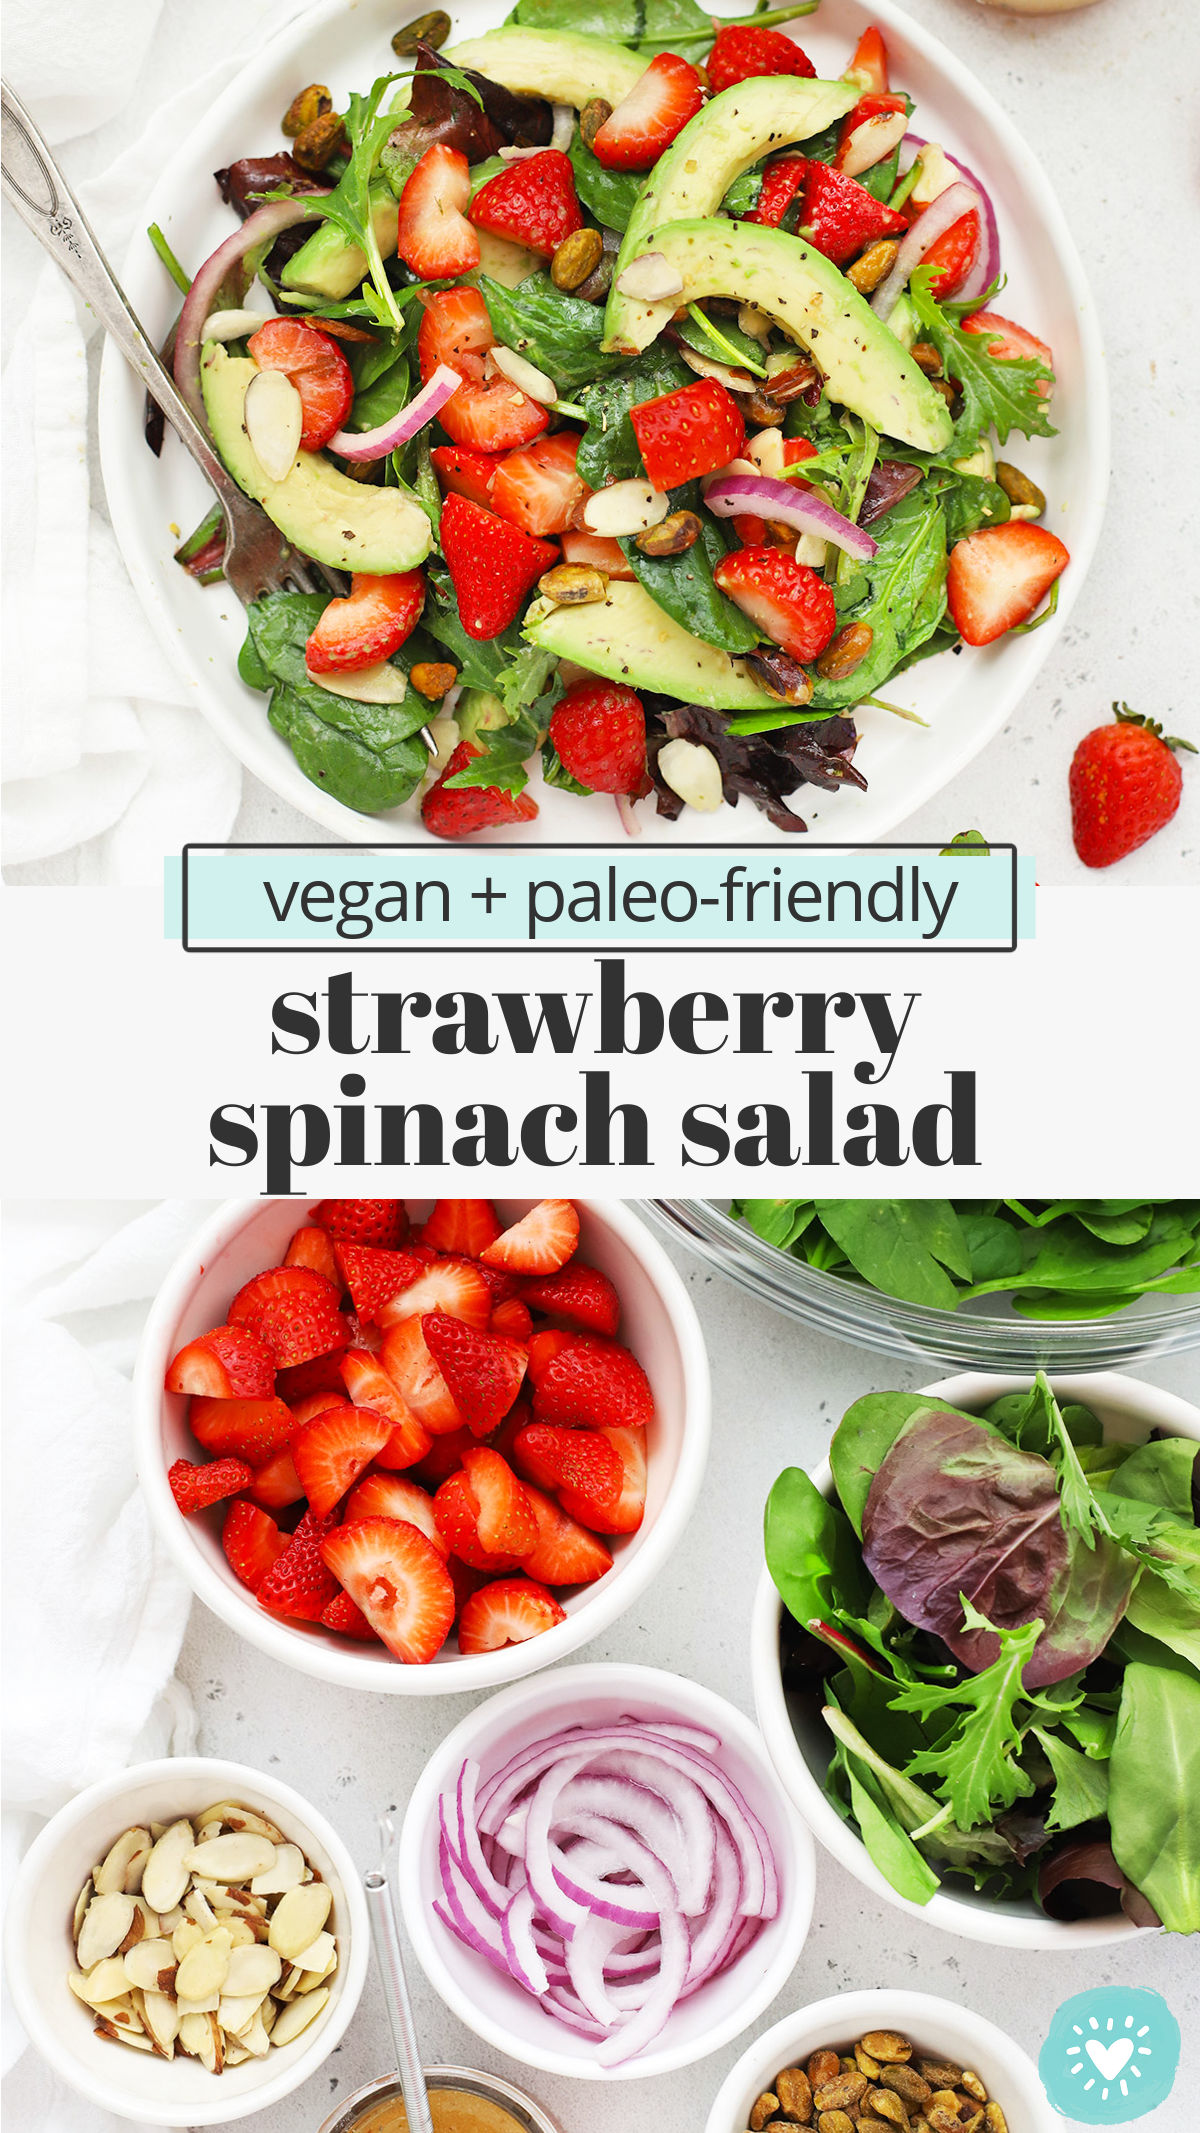 Strawberry Spinach Salad - This strawberry spinach salad recipe is light, bright, and so easy! You'll love the tangy dressing! (Vegan, Paleo) // Paleo Strawberry Spinach Salad // Vegan Strawberry Spinach Salad // Healthy Strawberry Spinach Salad // Gluten-Free Strawberry Spinach Salad // Spring Salad // summer salad recipe